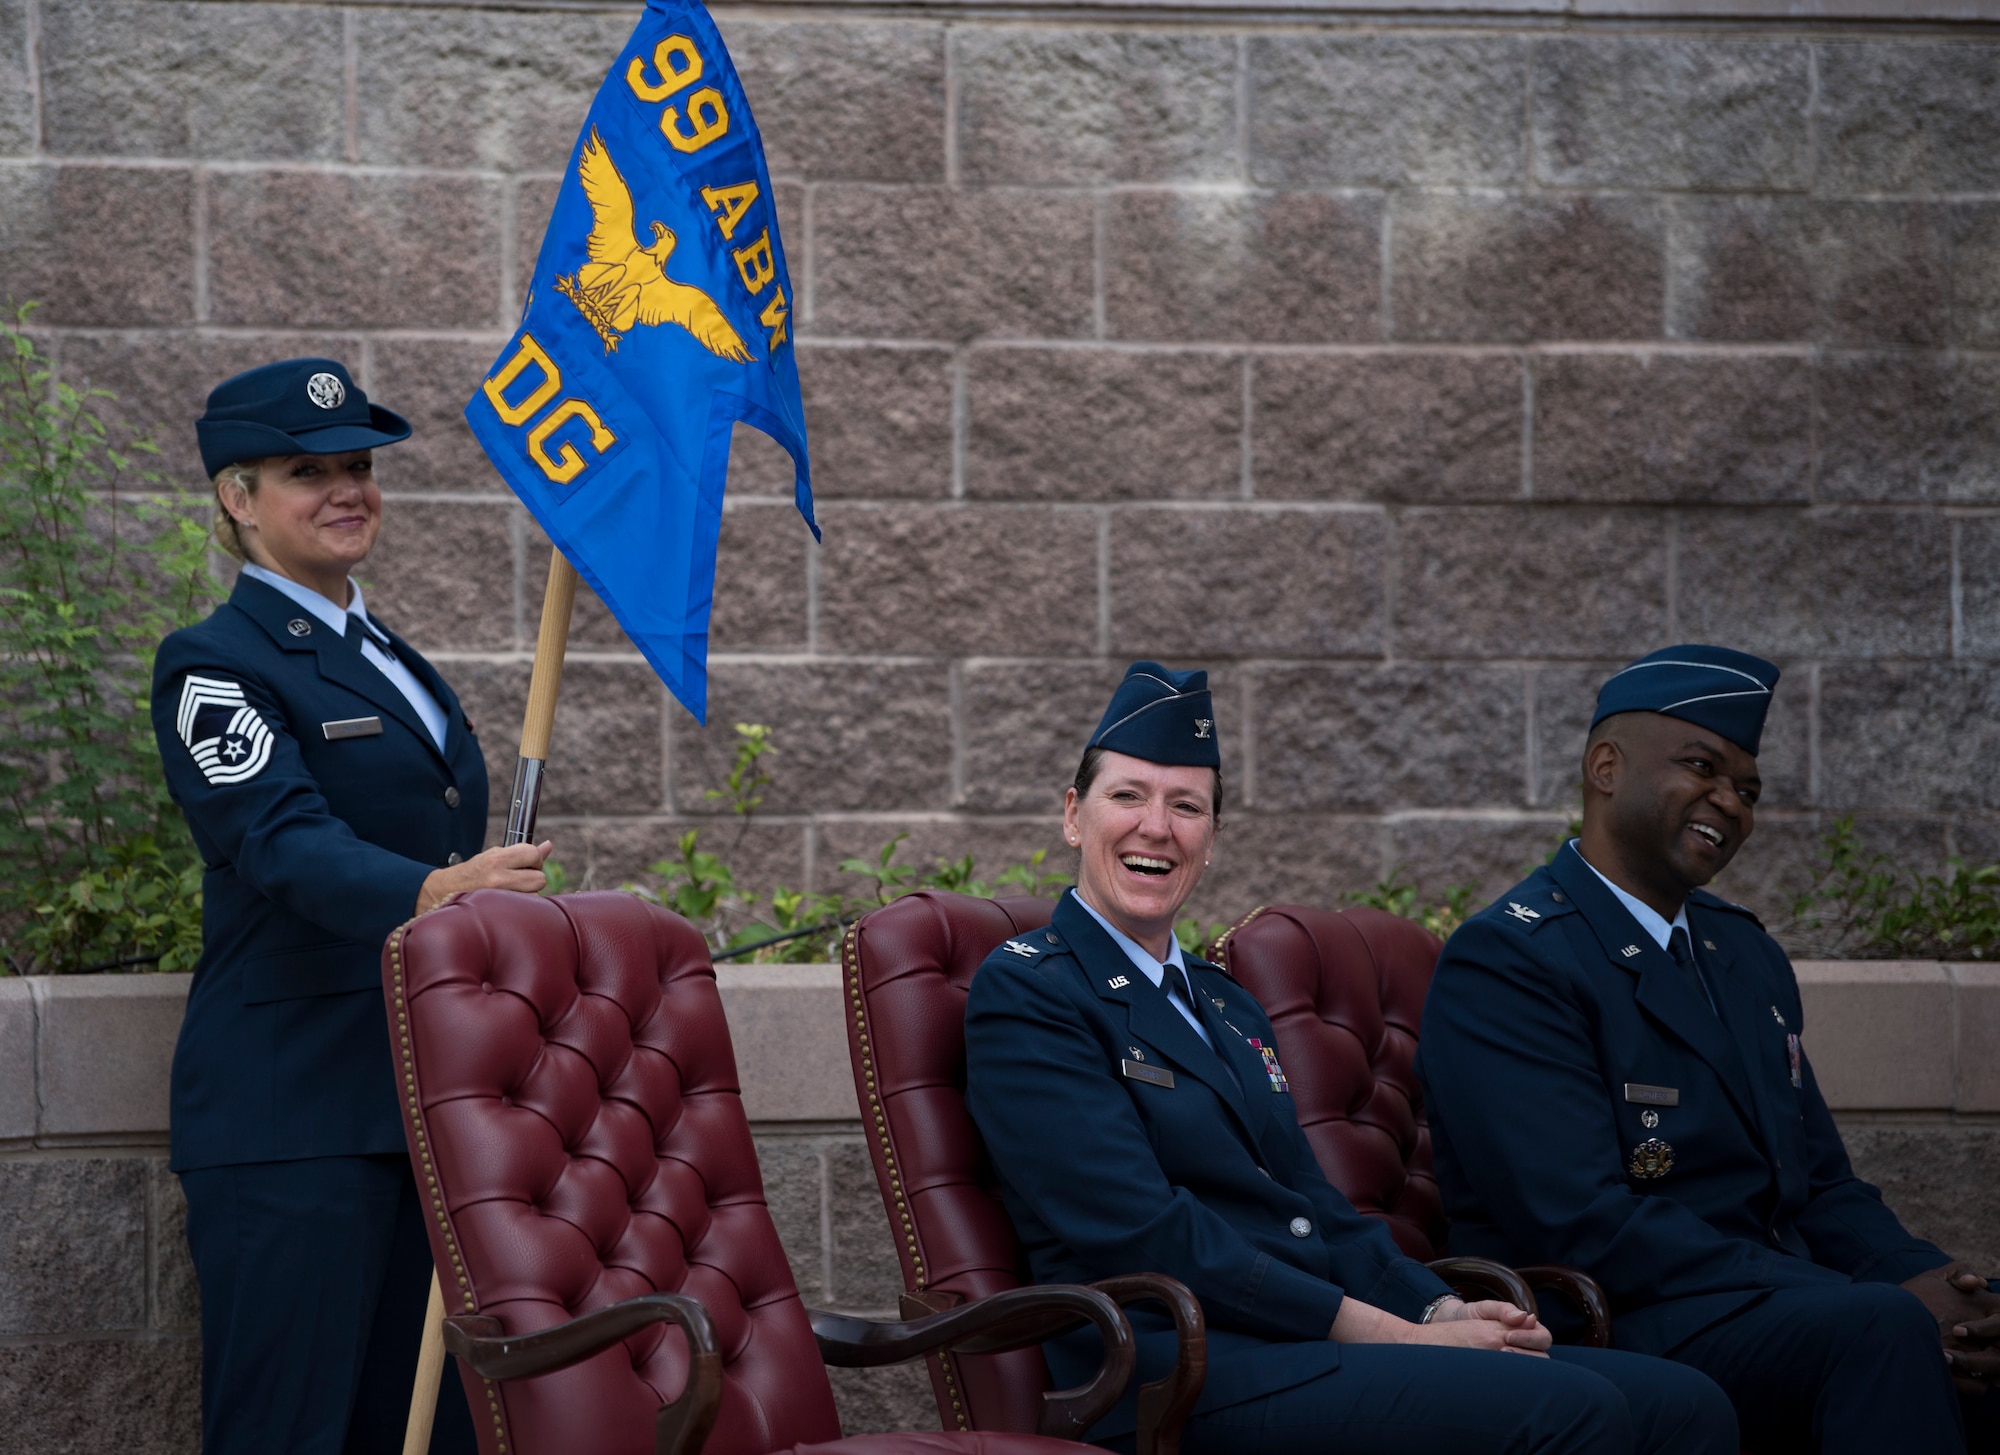 Chief Master Sgt. Nicole Owens, 99th Medical Group superintendent, Col. Virginia Garner, 99th MDG outgoing commander, and Col. Alfred Flowers Jr., 99th MDG incoming commander, laugh during a change of command ceremony at Nellis Air Force Base, Nevada, June 29, 2018. Change of command ceremonies are a military tradition and dates back to the time of Frederick the Great of Prussia. (U.S. Air Force photo by Airman 1st Class Andrew D. Sarver)